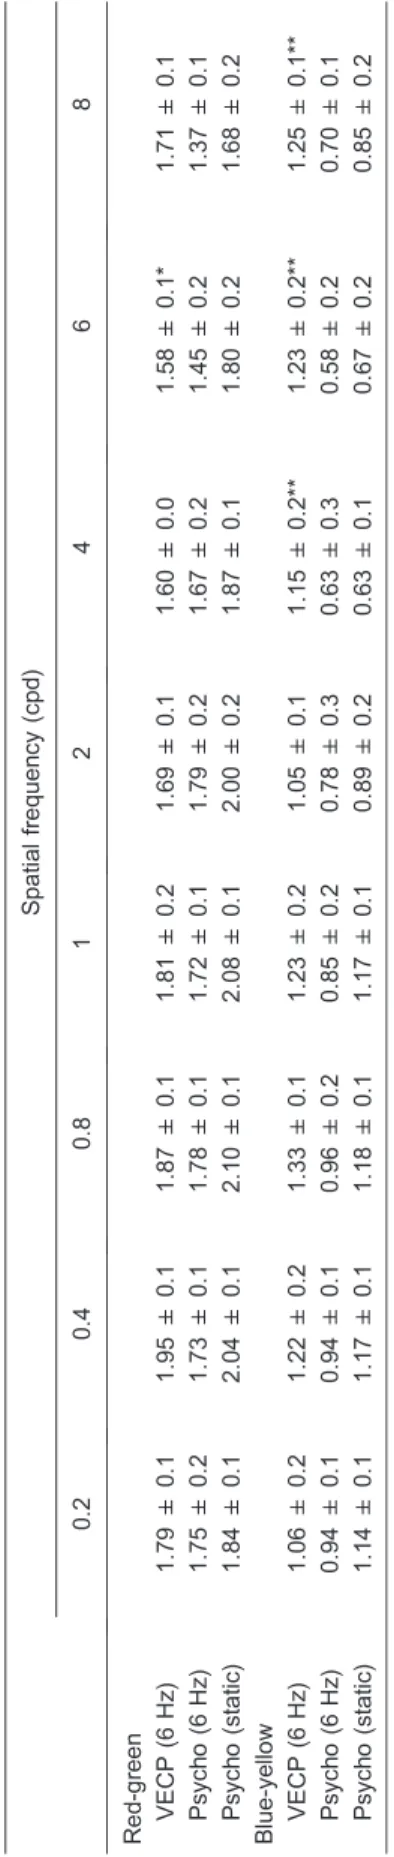 Figure 3. Contrast sensitivity to red-green (A) and blue-yellow (B) sinusoidal gratings obtained as the inverse of contrast thresholds estimated for 6 normal trichromat subjects